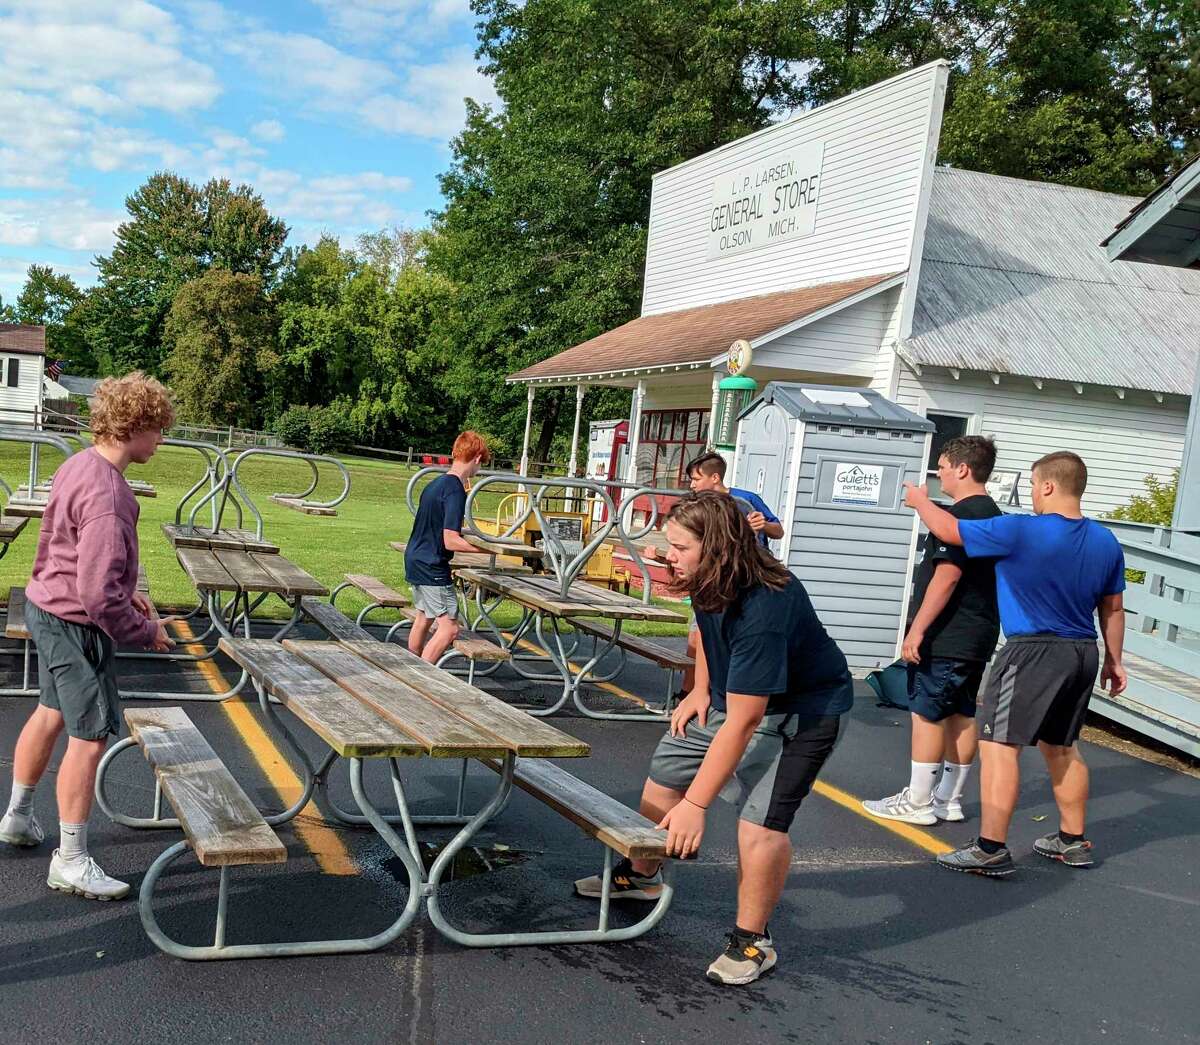 Meridian Early College High School football players help set up for the annual Sanford Founders Day on Wednesday. (Tereasa Nims/for the Daily News)